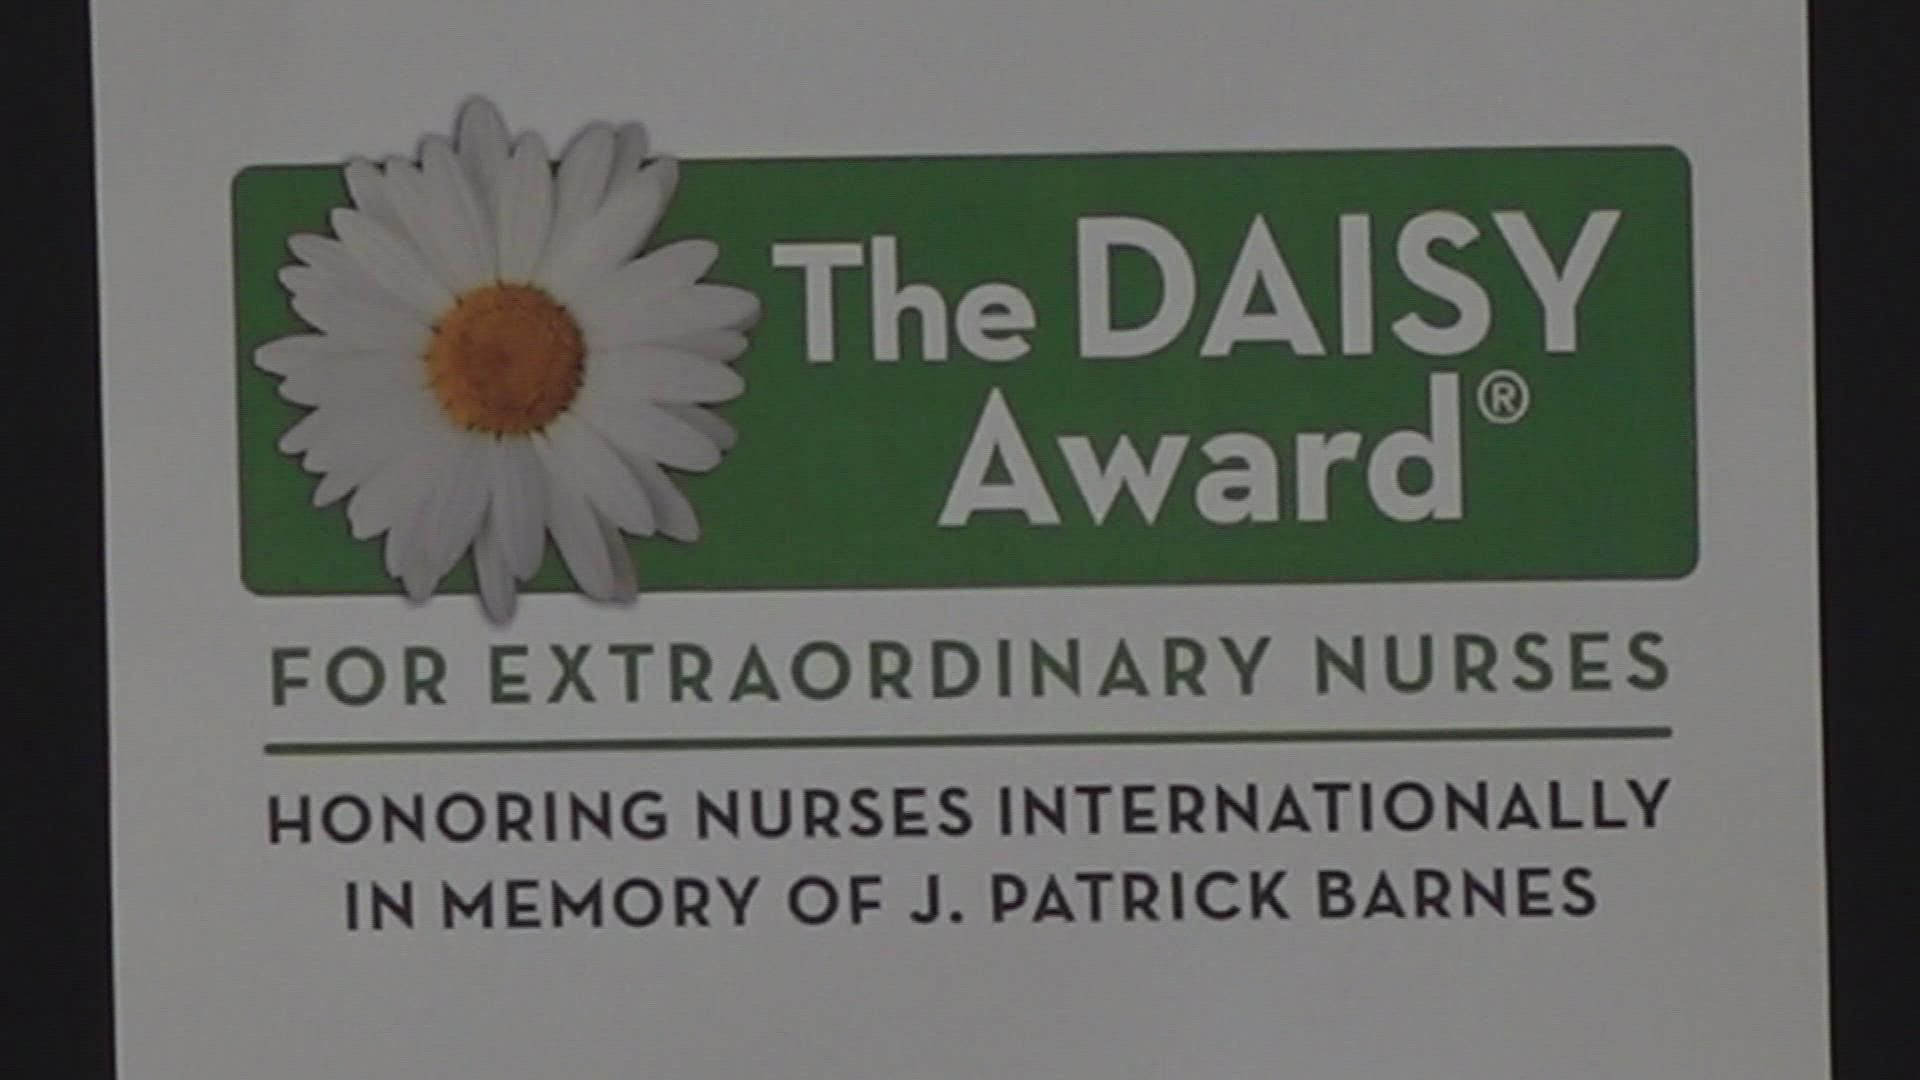 This award recognizes nurses who have devoted their life's work to the compassionate care of others.